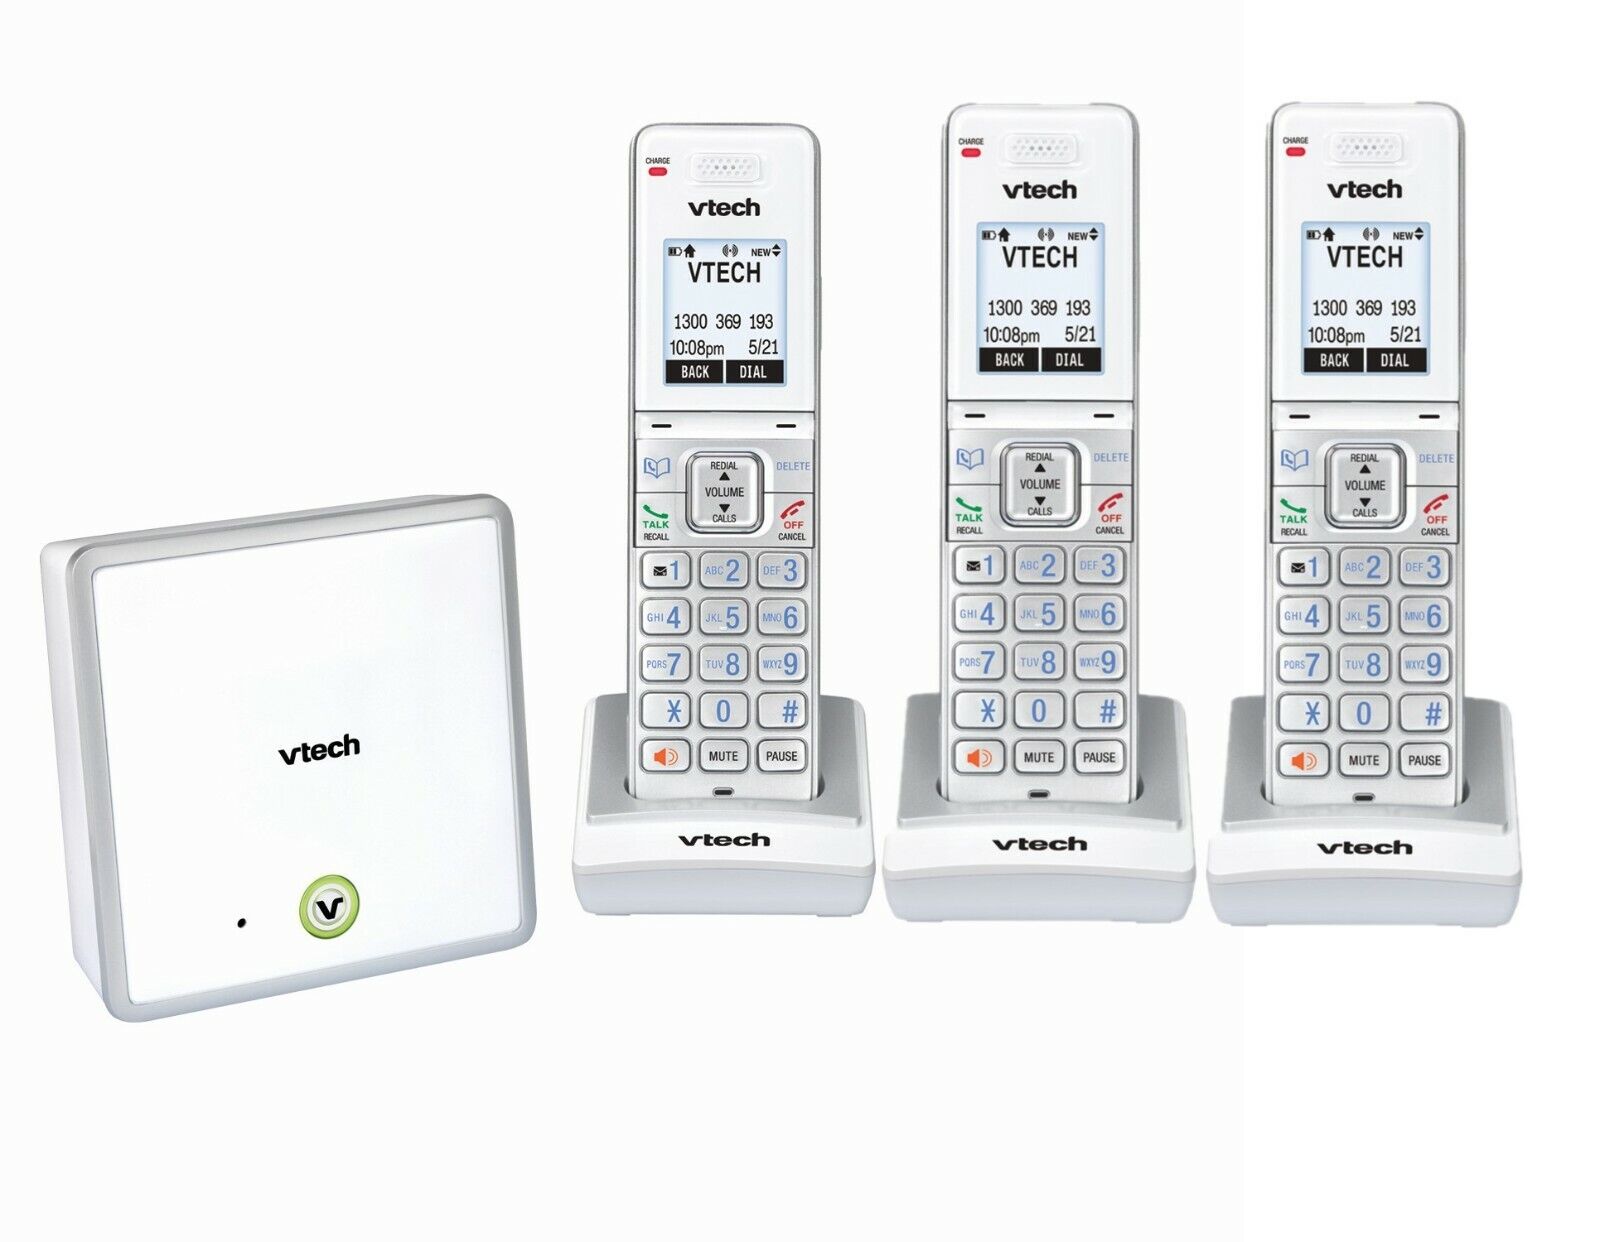 VTech 18150 triple handset DECT6.0 Cordless Phone with answering machine